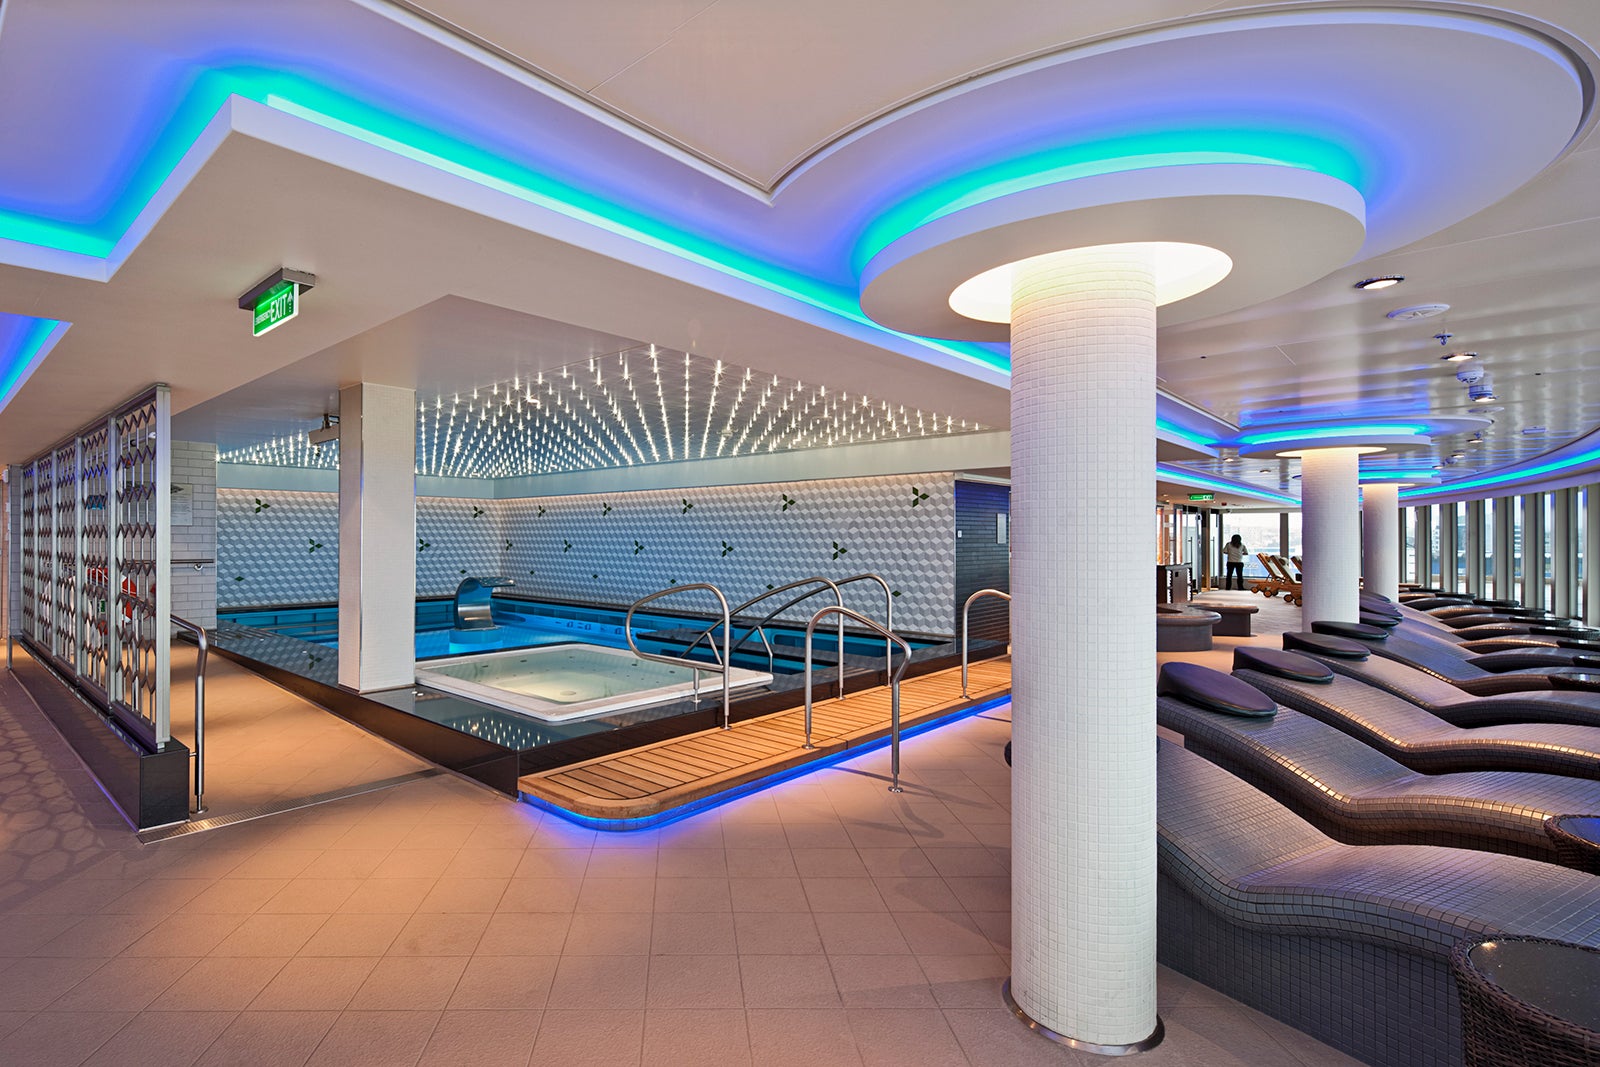 A cruise ship spa's thermal suite area, featuring a heated pool and tile loungers